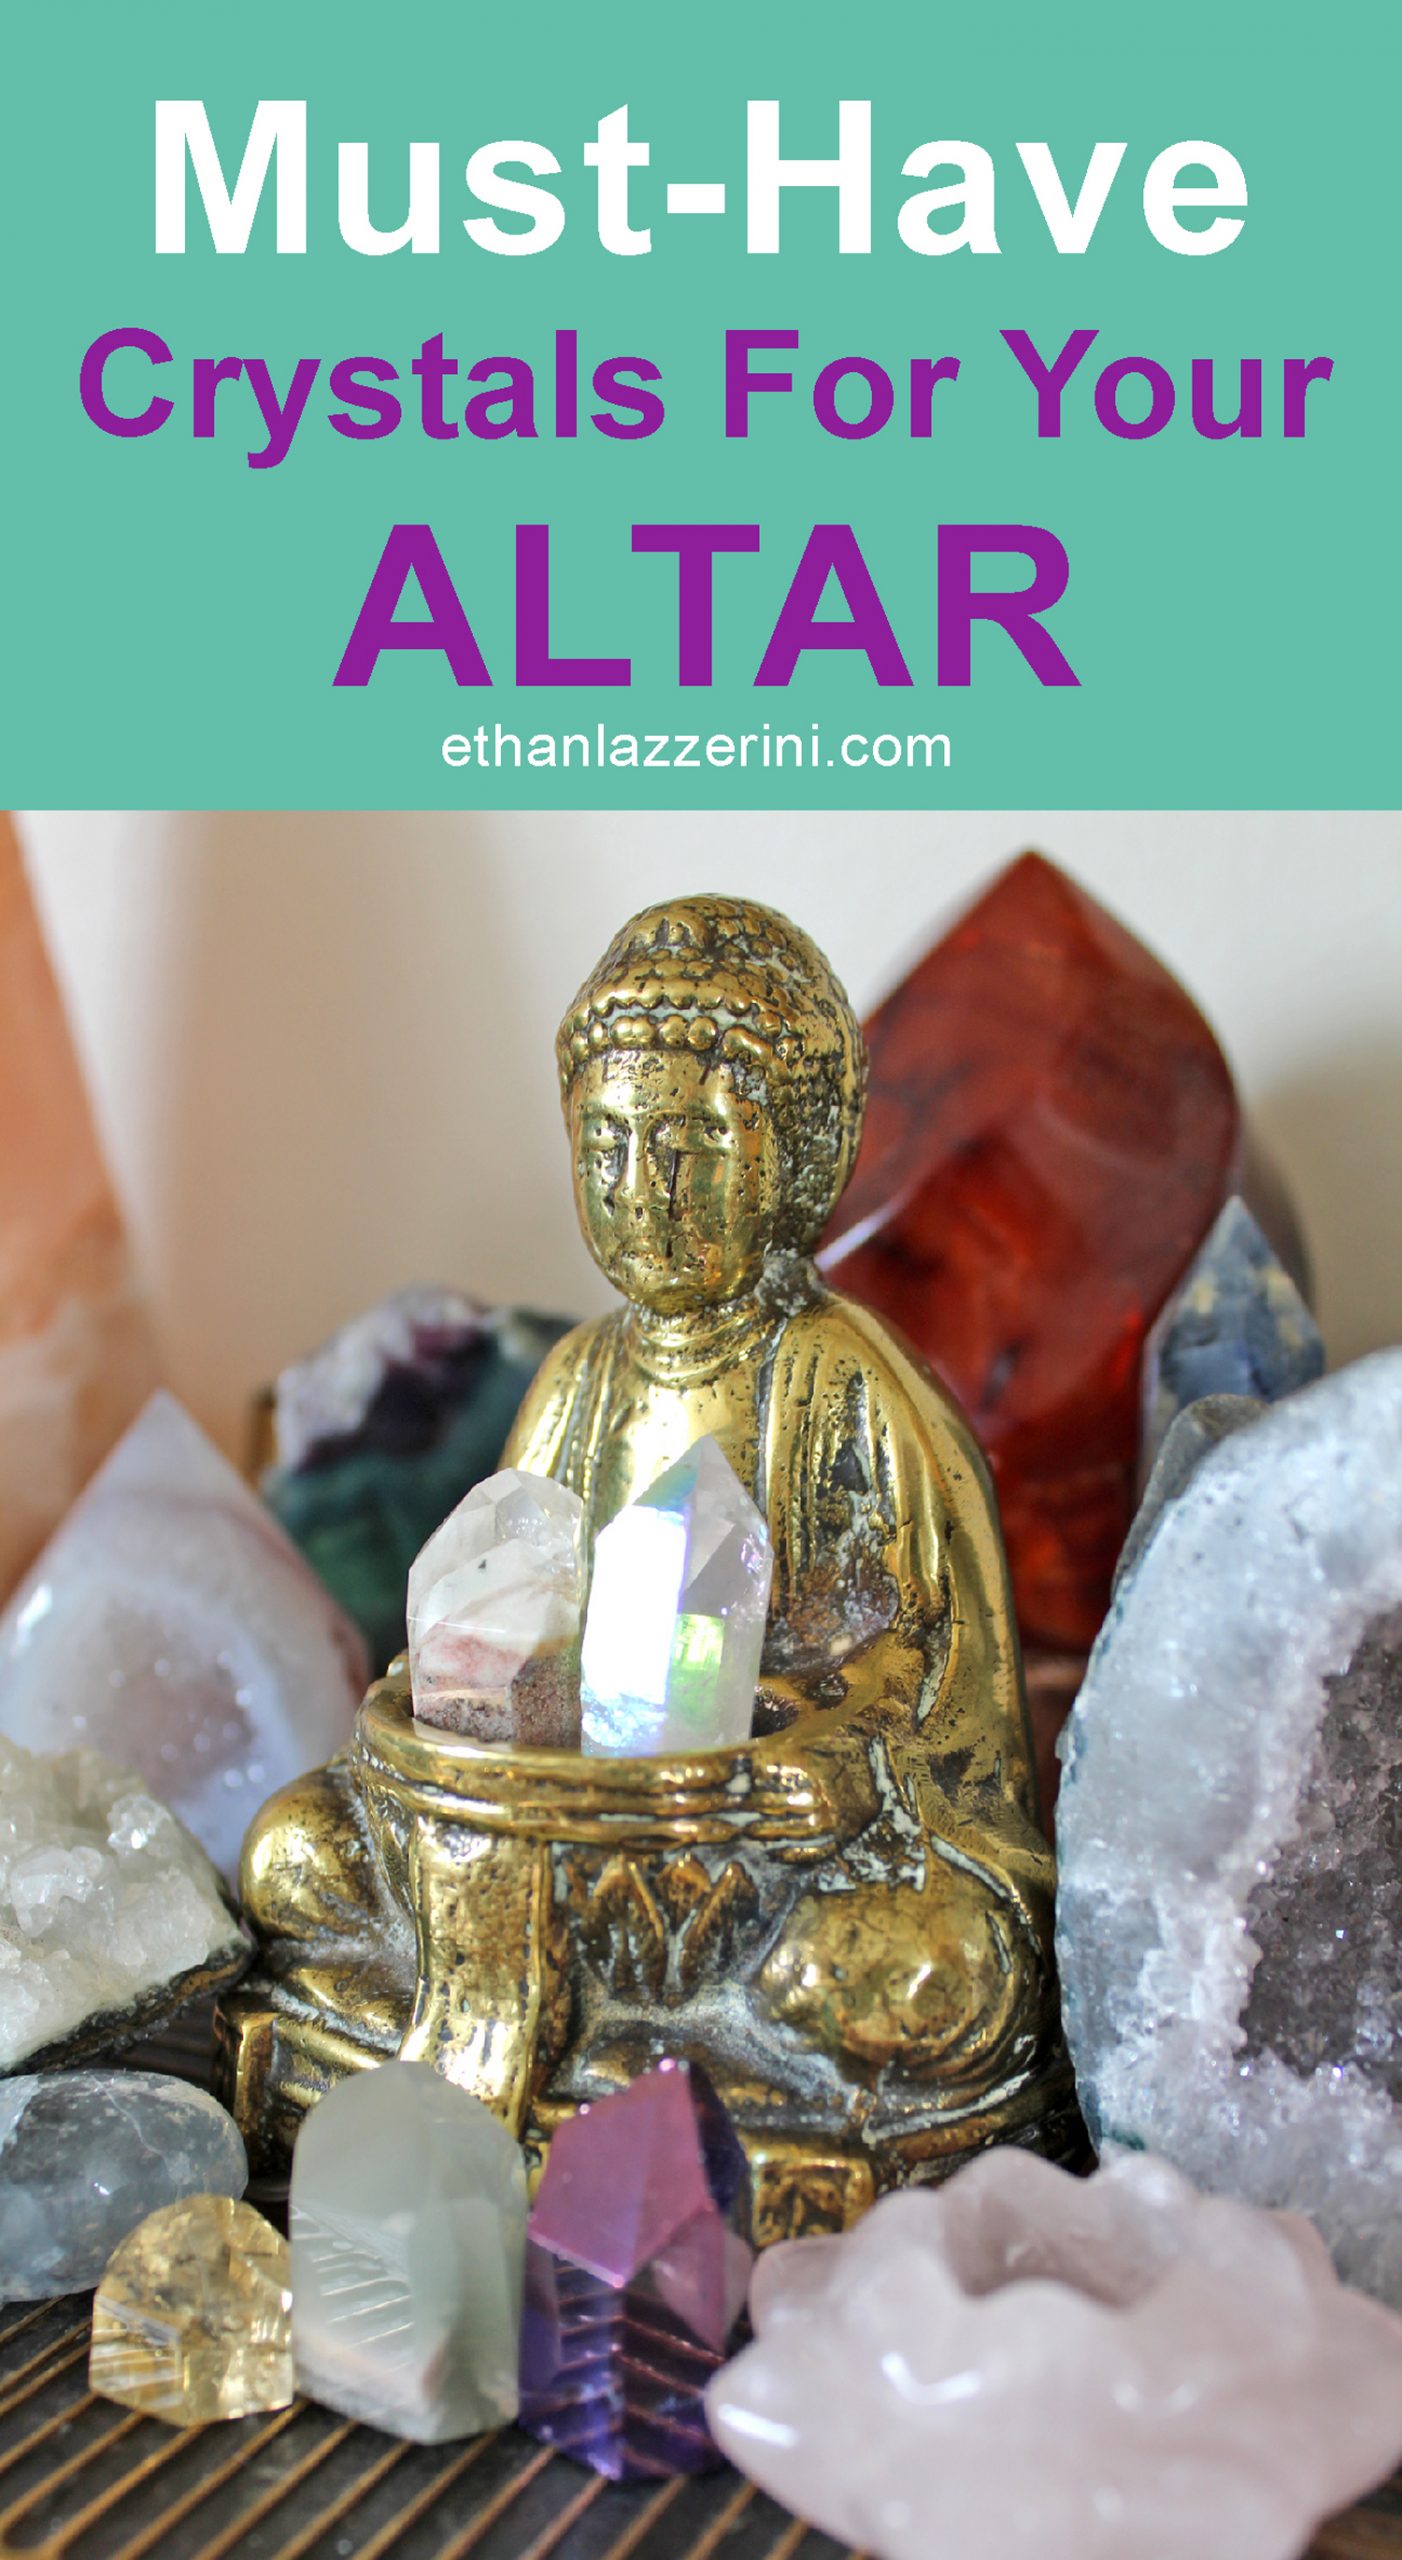 Brass Buddha with crystal points in a bowl surrounded by lots of crystals, geode and rose quartz lotus flower